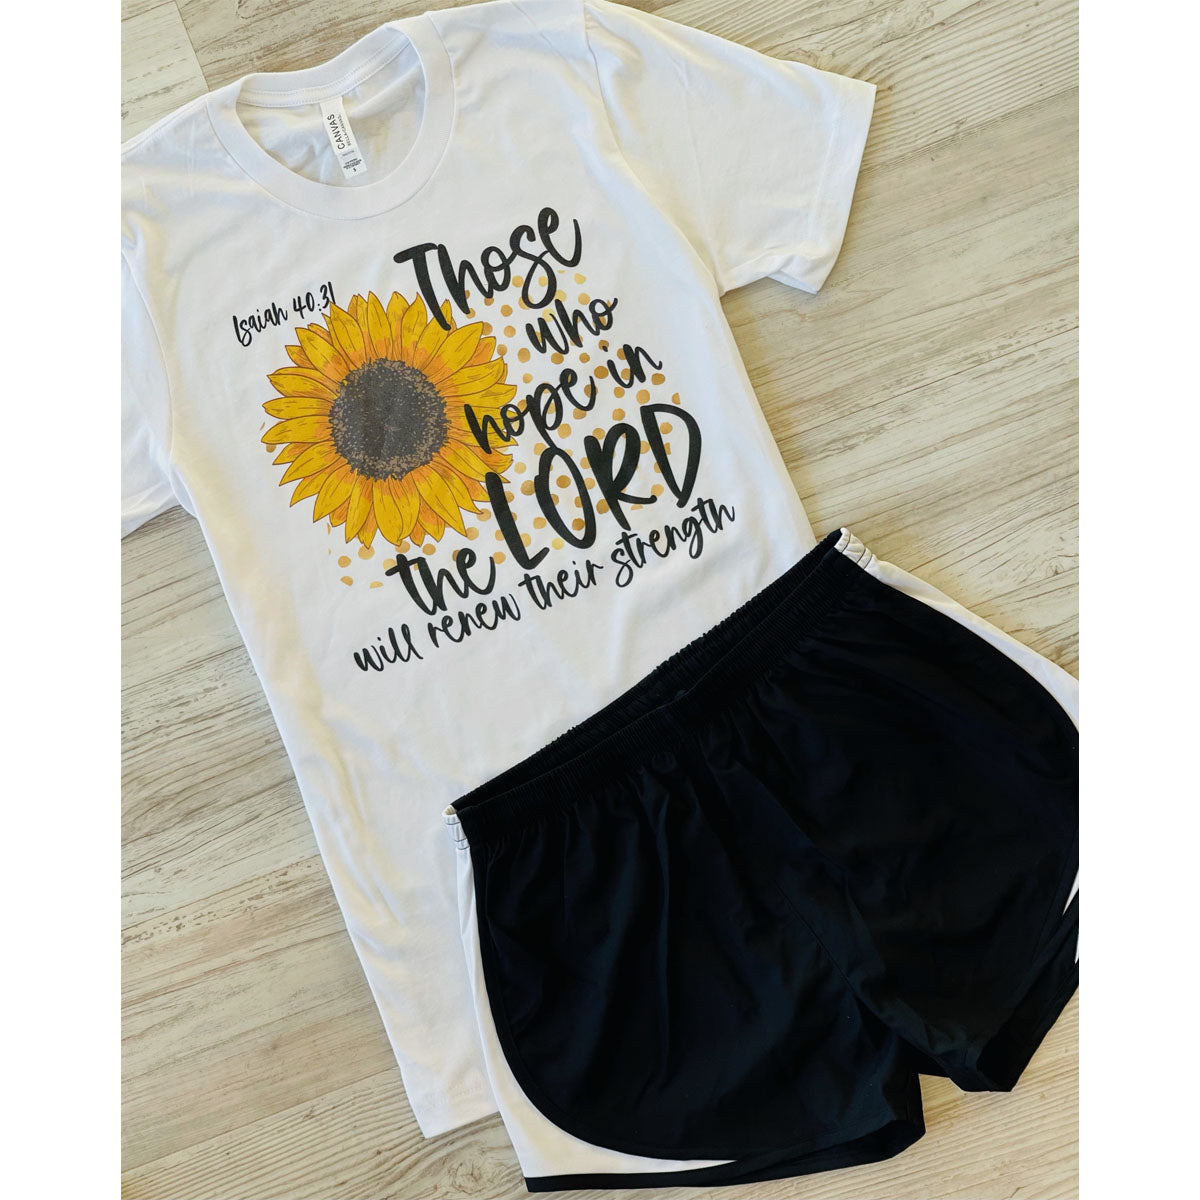 Those Who Hope In The Lord - White Short Sleeve Tee - Southern Grace Creations